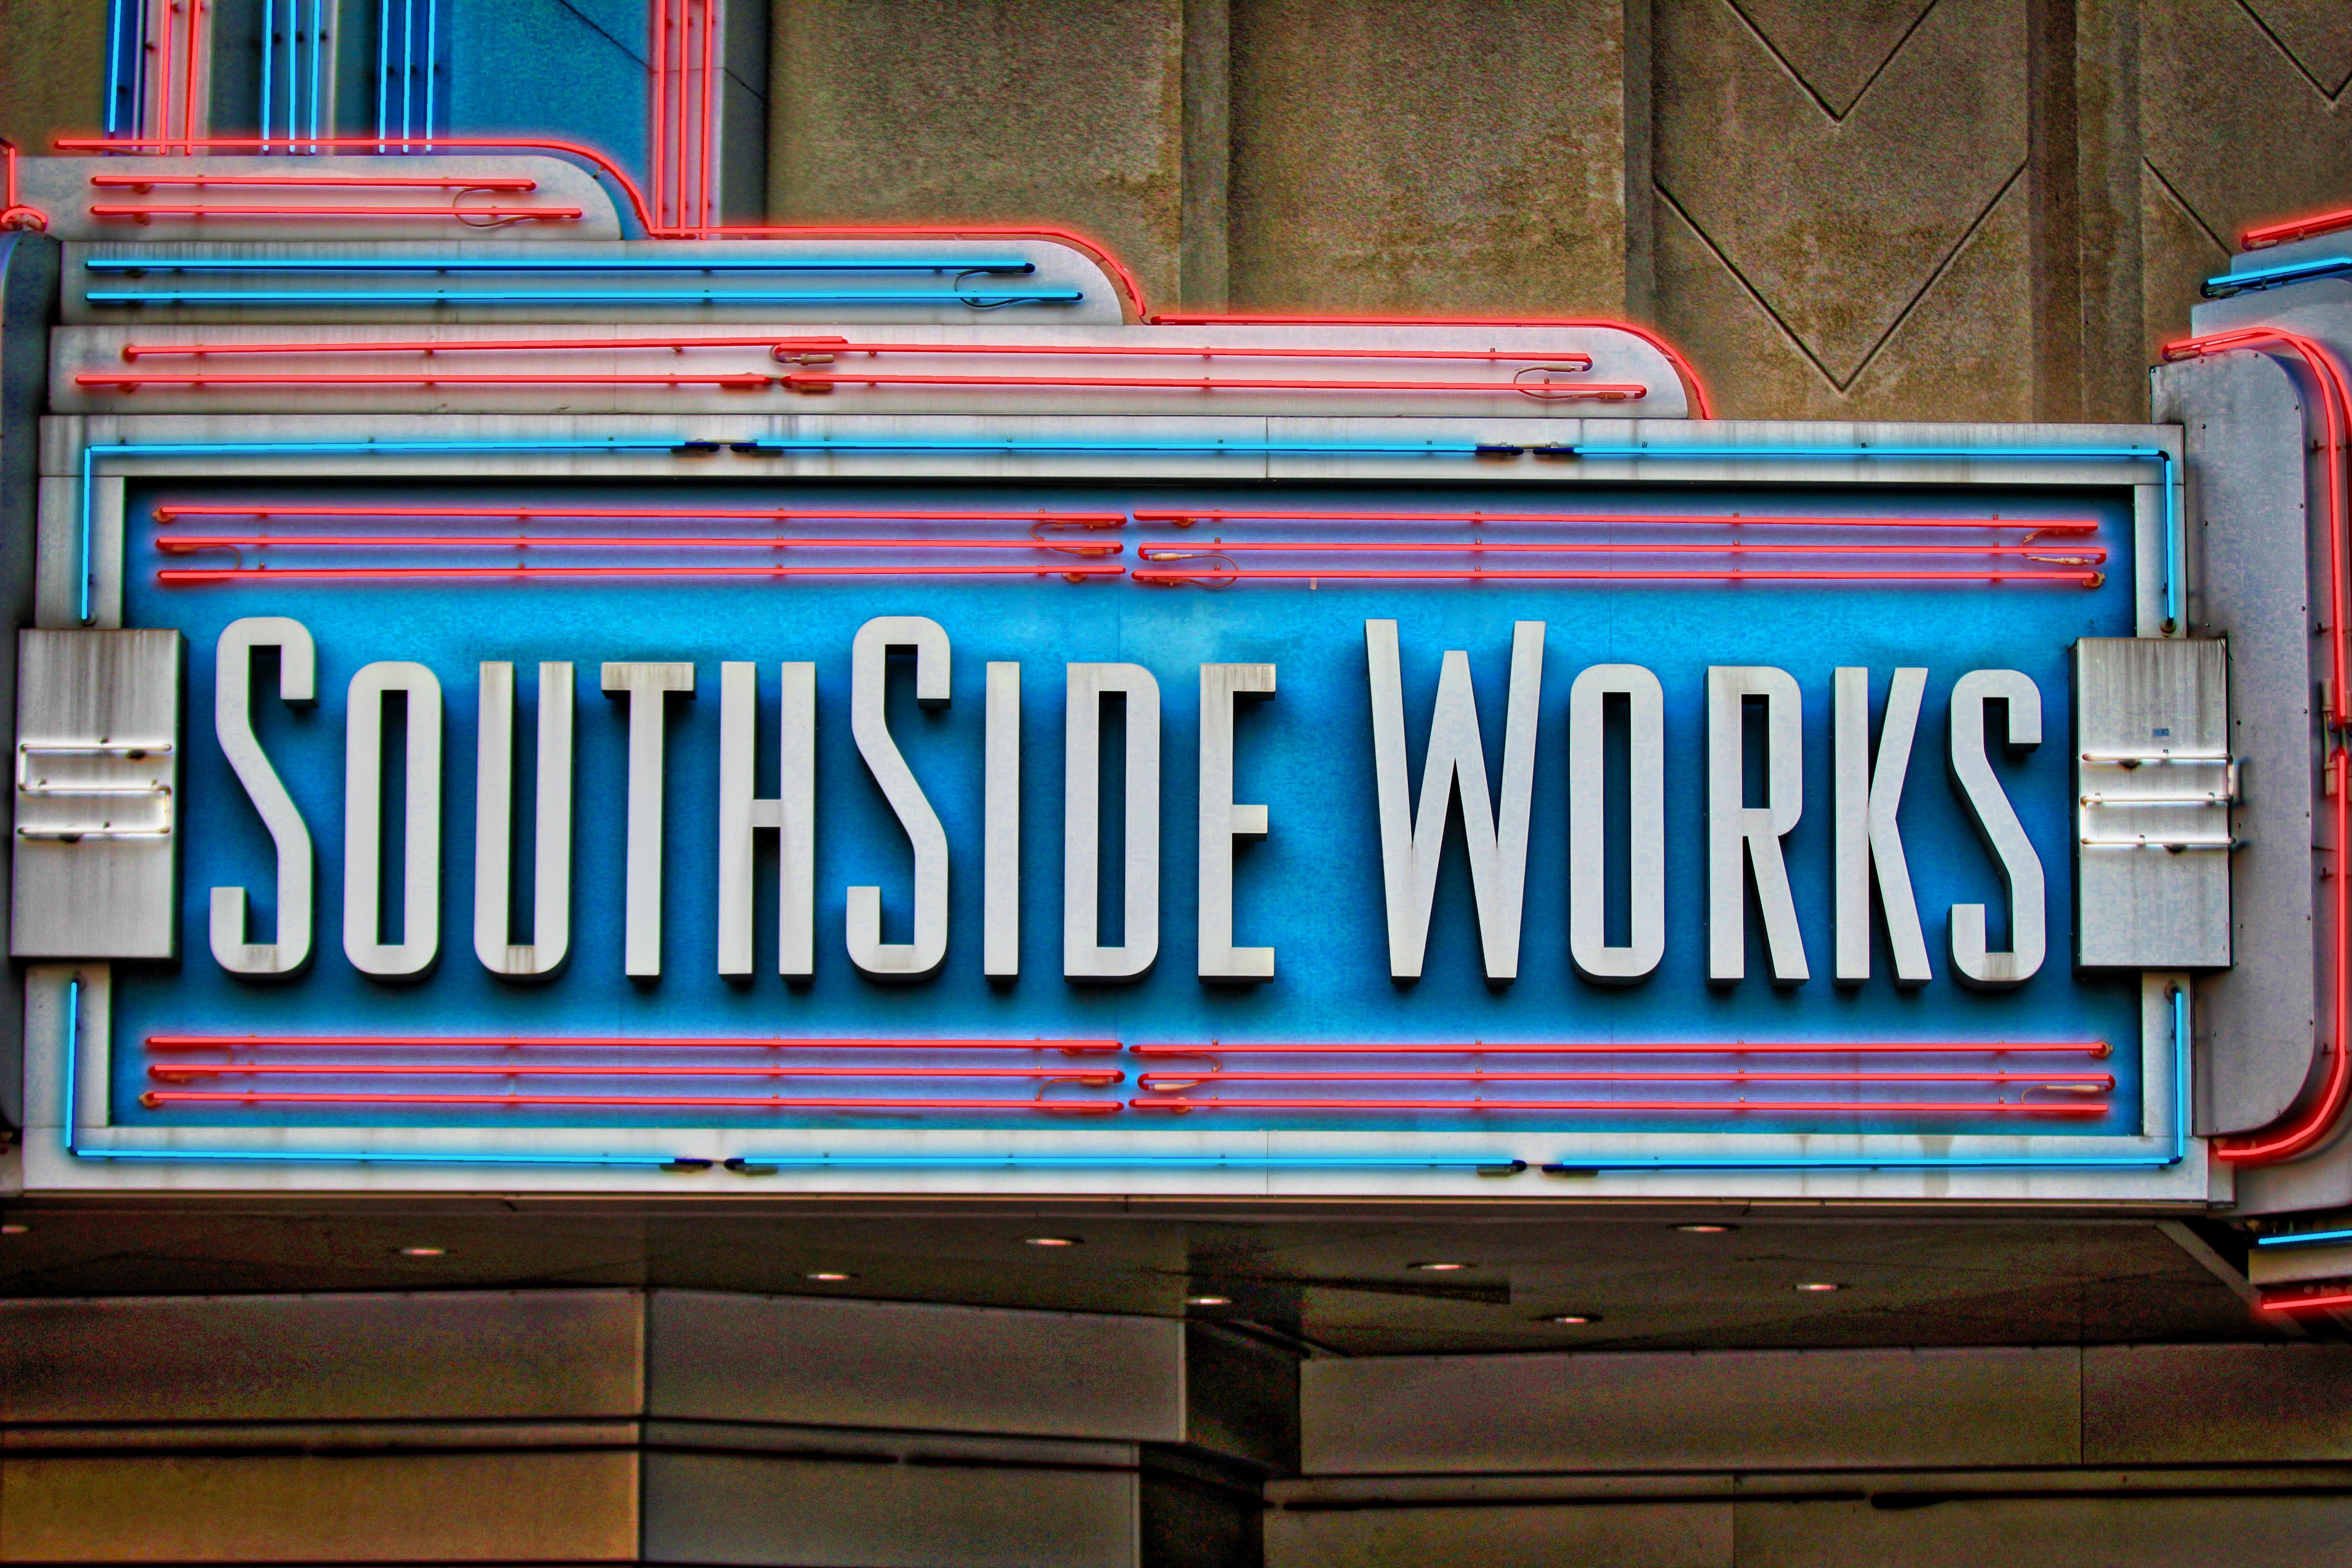 SouthSide Works, located in South Side, Pittsburgh, PA is home to great restaurants and shopping on our list of 50 Things to Do in Pittsburgh This Summer.